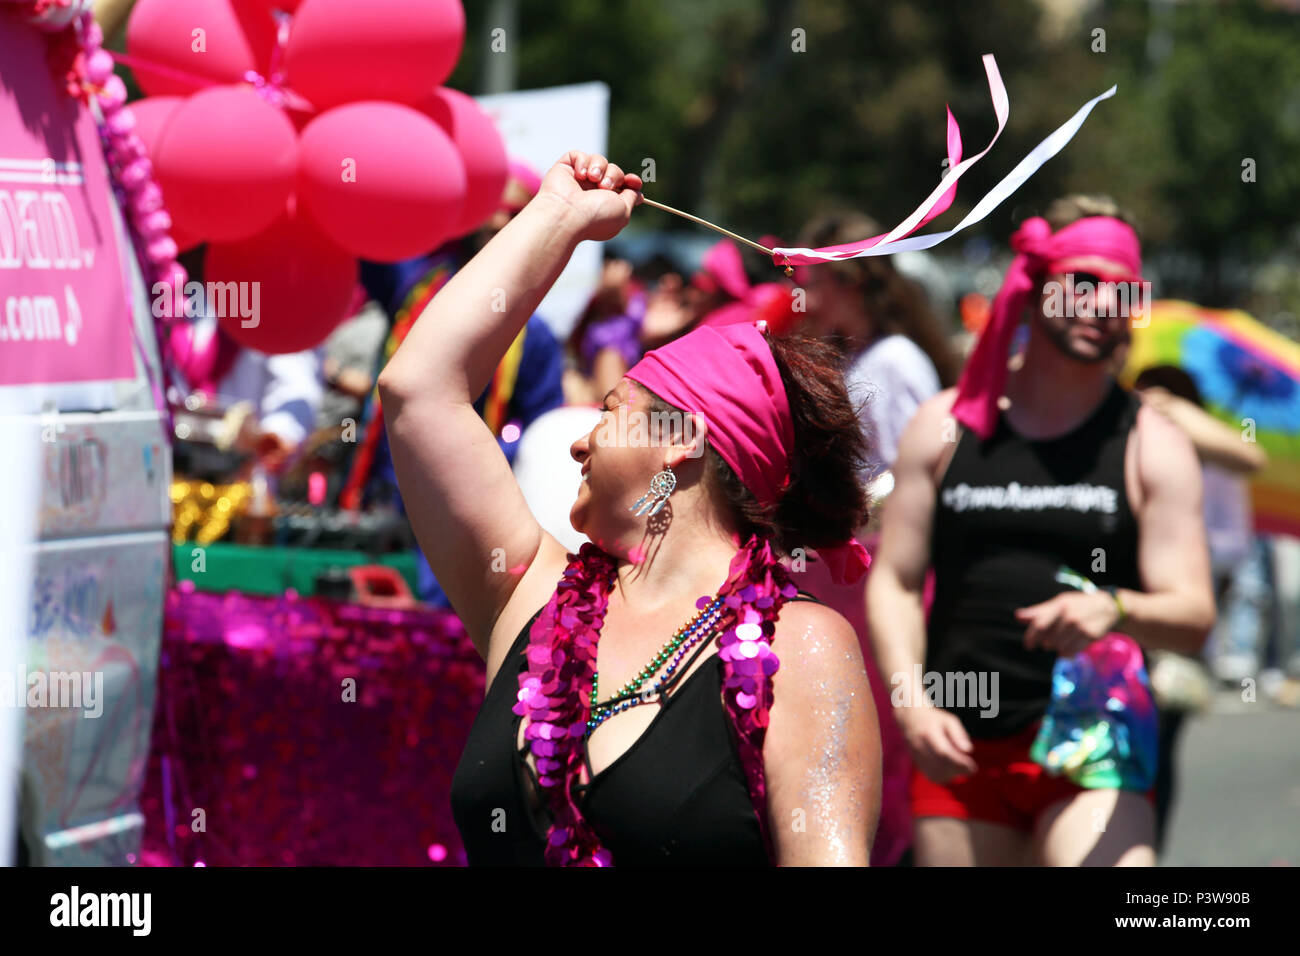 Los Angeles, California, USA. 10th June, 2018. Muslims for Progressive Values Community participates in the LA Pride Parade in West Hollywood. The annual LGBTQ celebration drew an estimated crowd of 150,000 people. Credit: Katrina Kochneva/ZUMA Wire/Alamy Live News Stock Photo